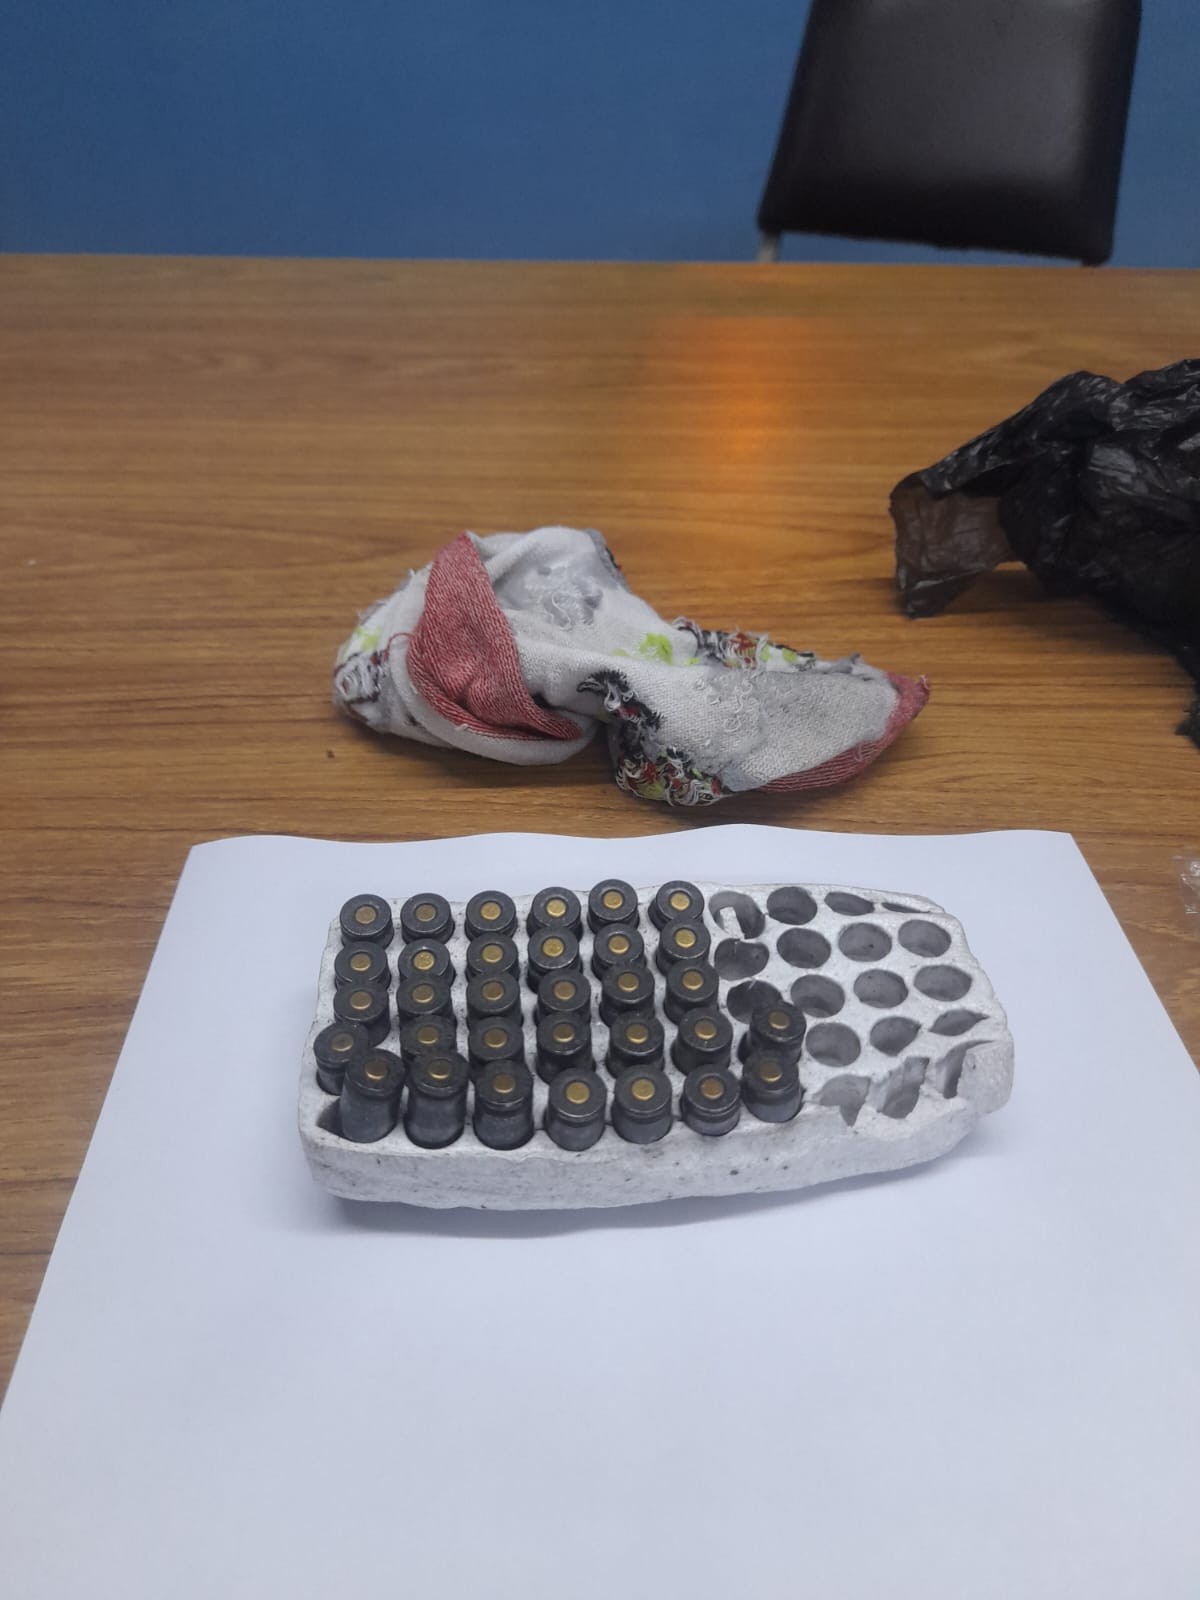 Ammo and cocaine seized in South Trinidad